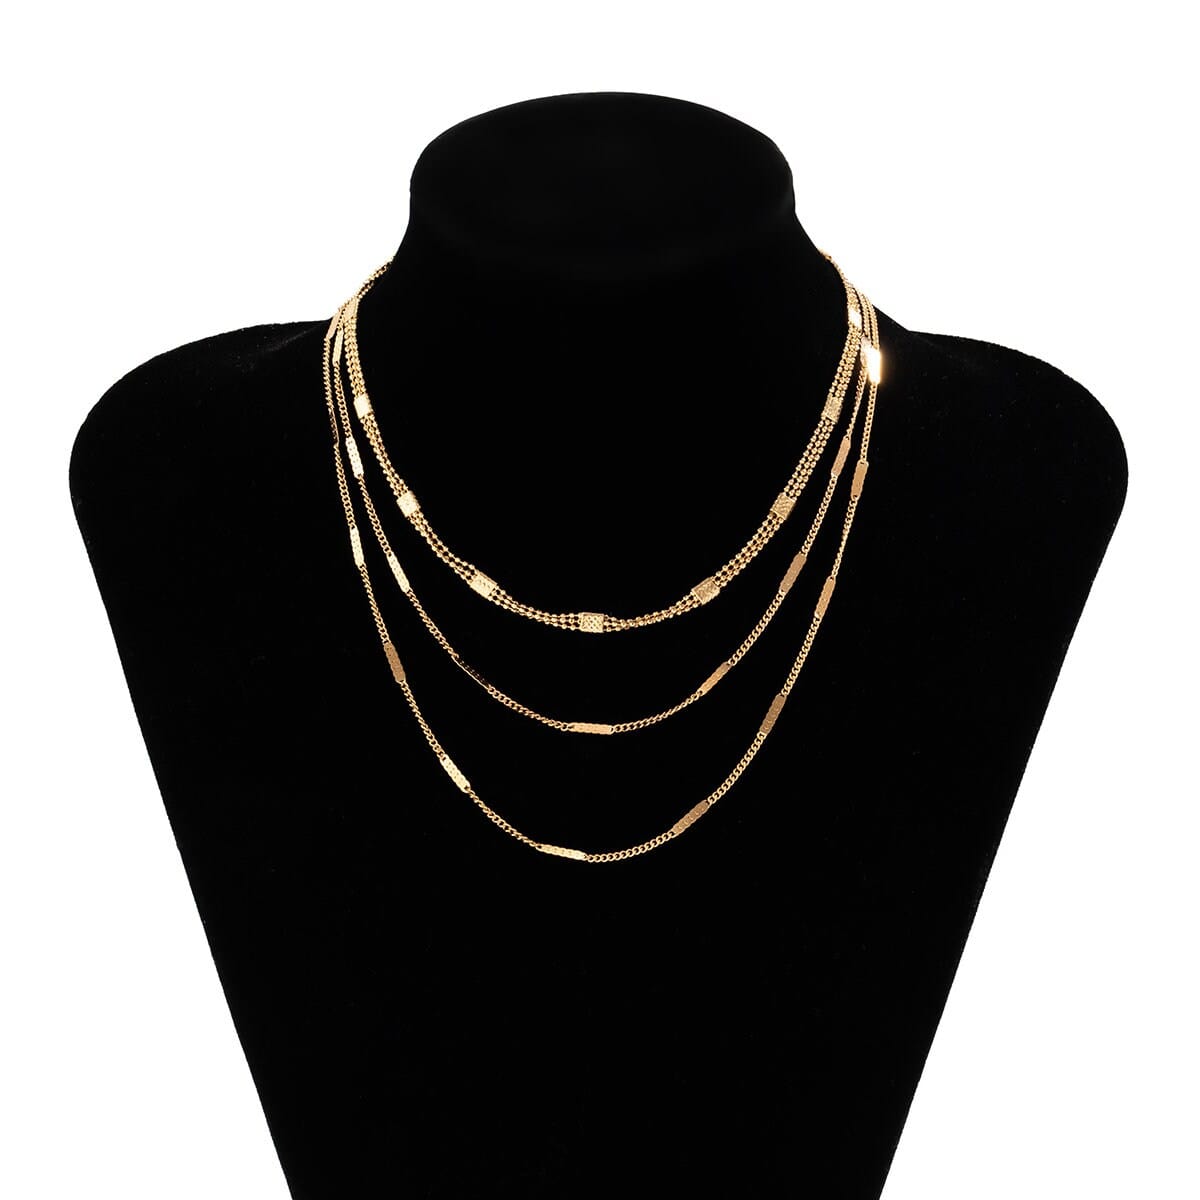 Chain Curb – Silver ArtGalleryZen Layered Necklace Chic Gold Link Set Tone Ball